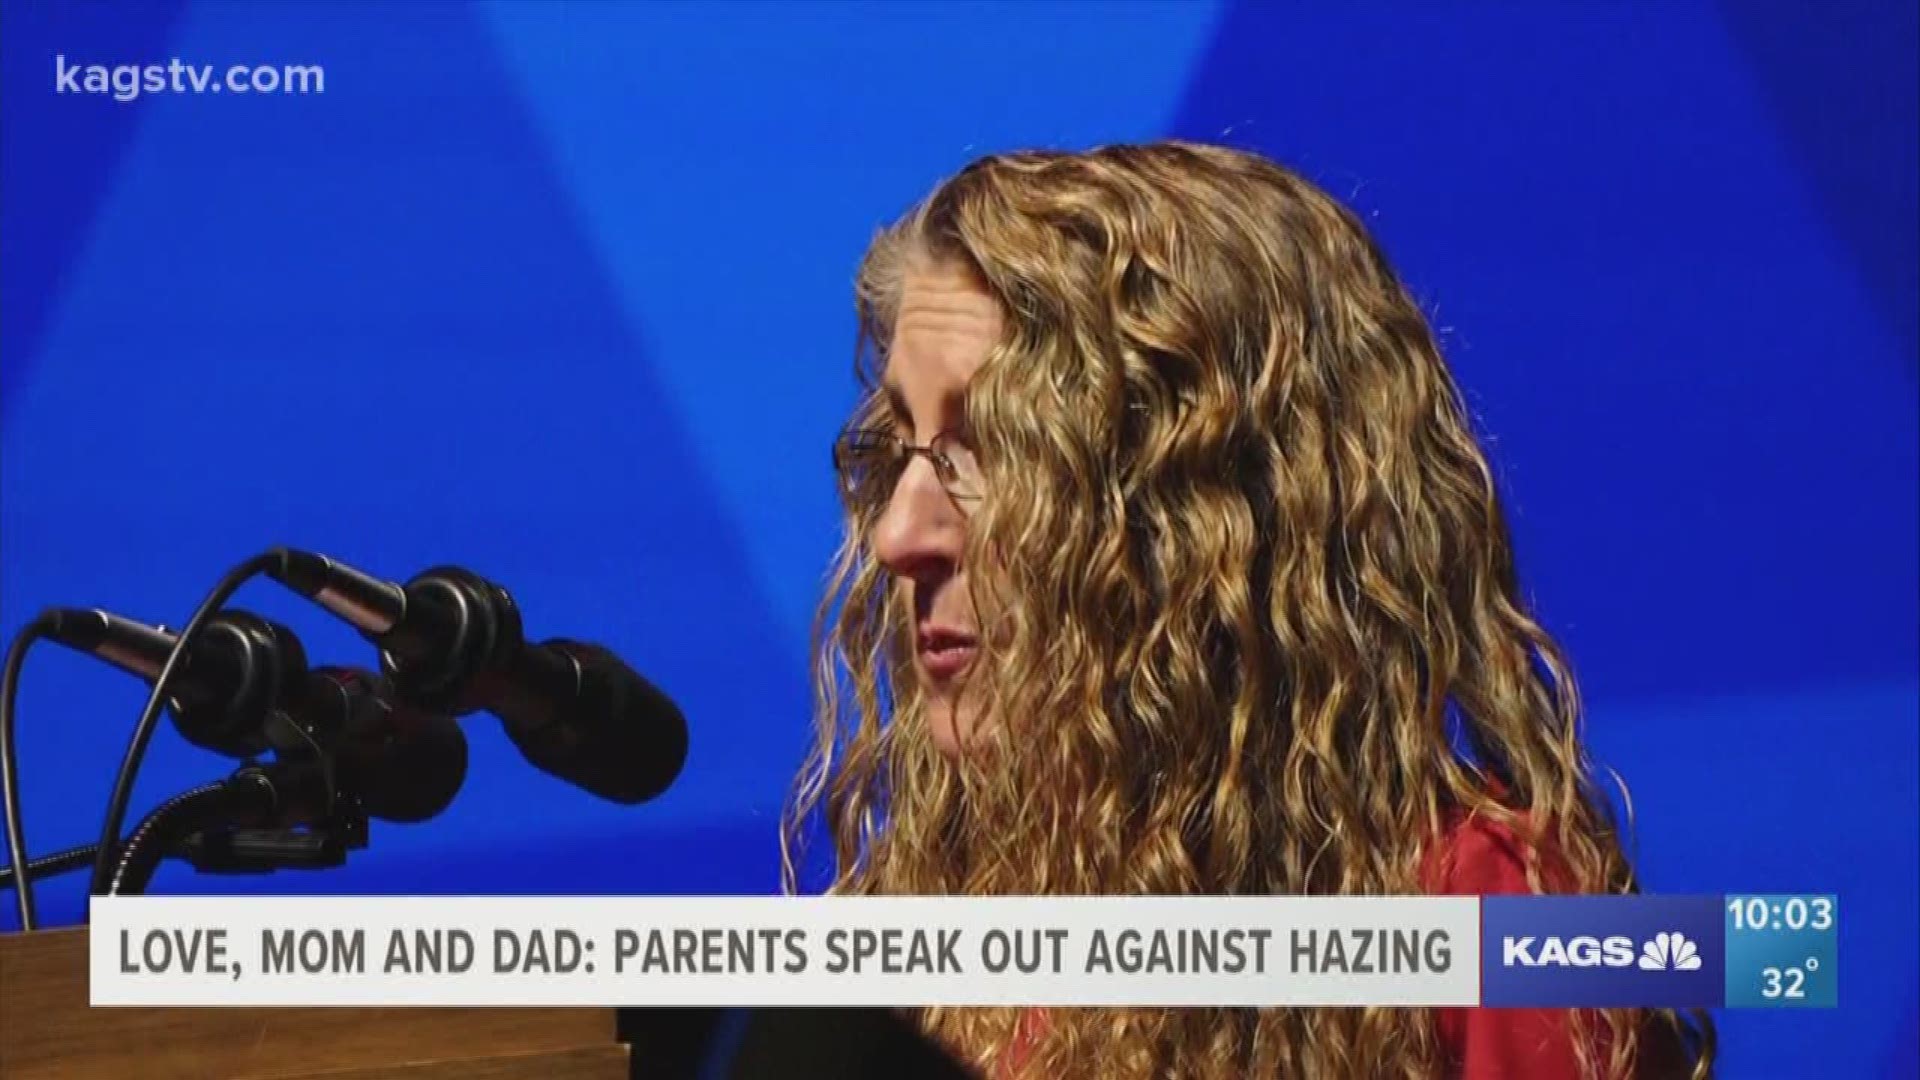 Parents who have lost their children to hazing spoke out at a hazing awareness event sponsored by A&M.